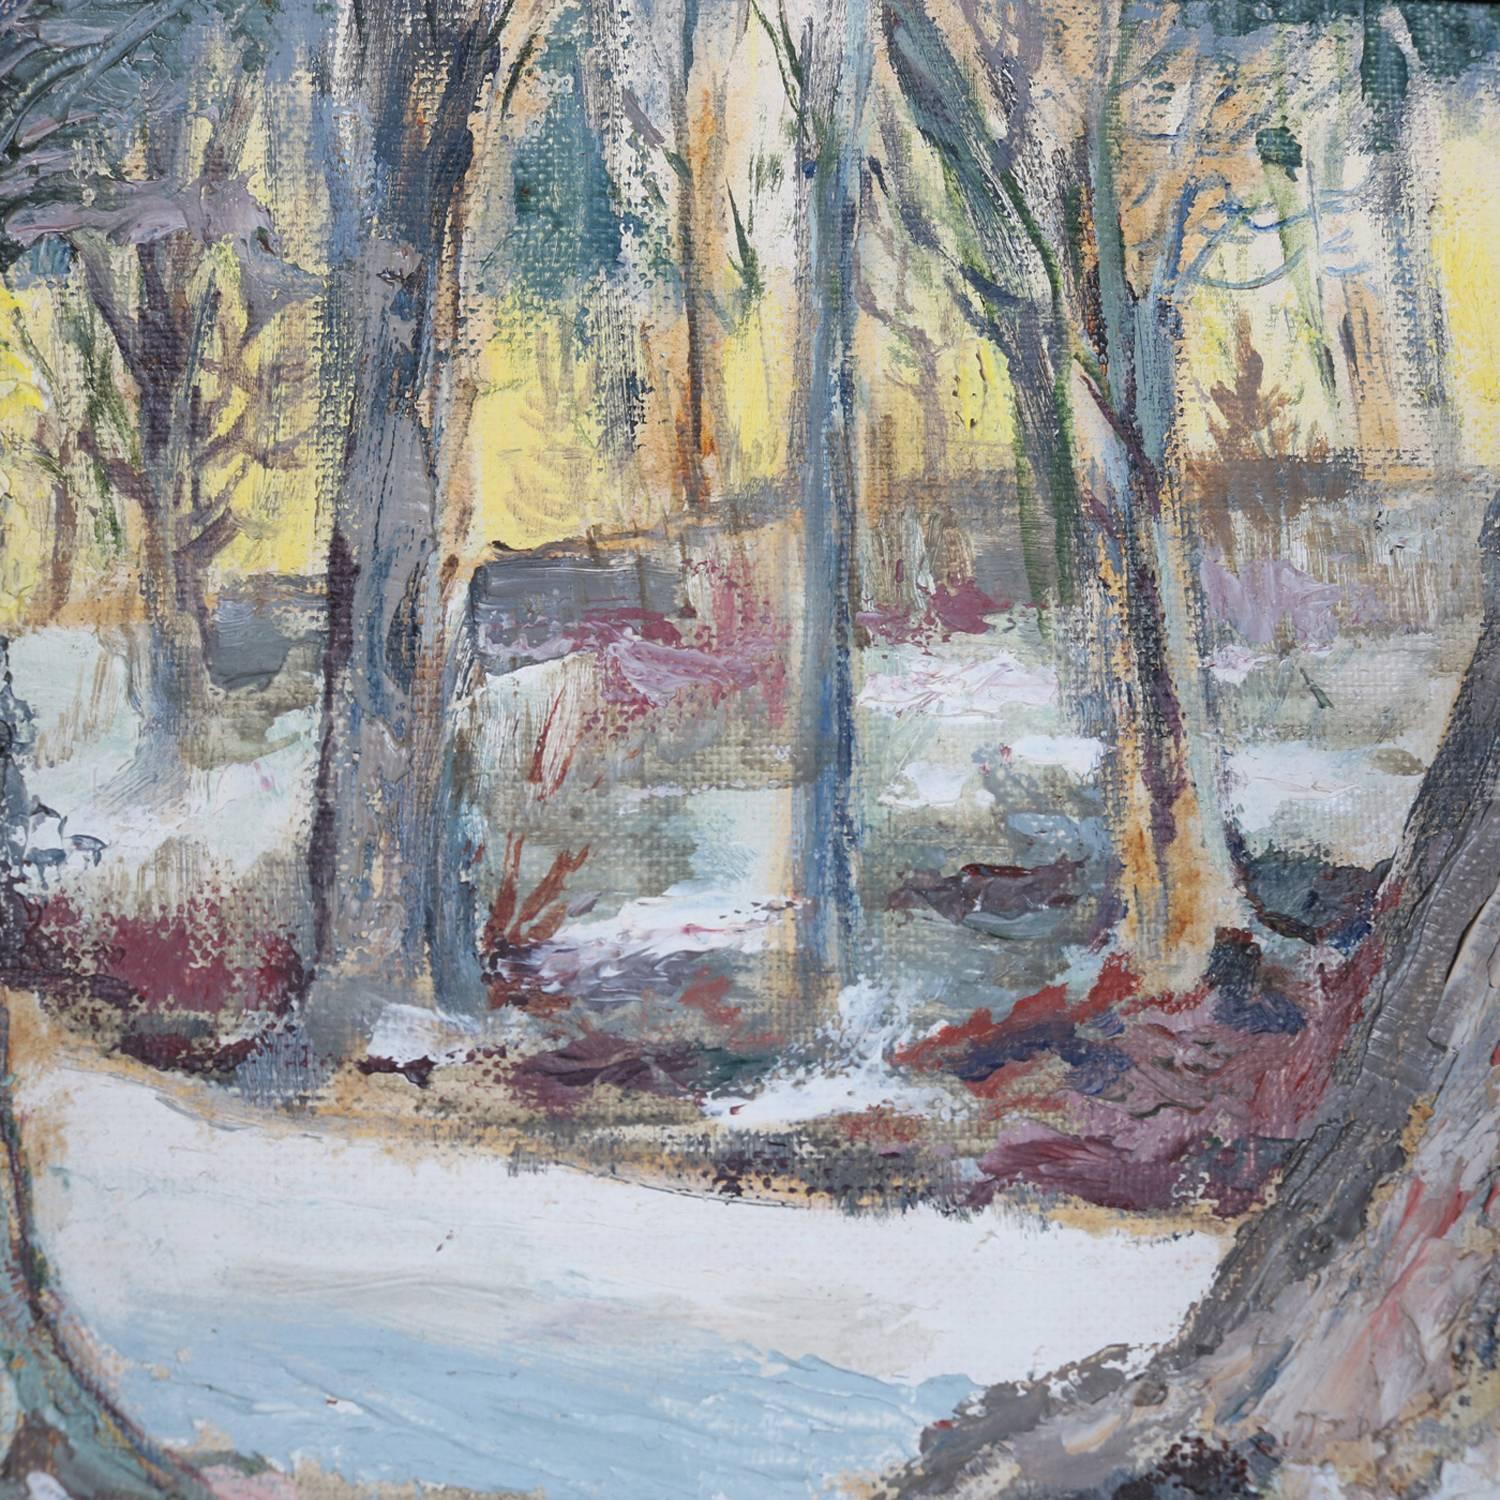 Oil on canvas impressionist landscape painting of woodland winter scene with stream, signed lower left MM, 20th century

Measures - fr: 15.25